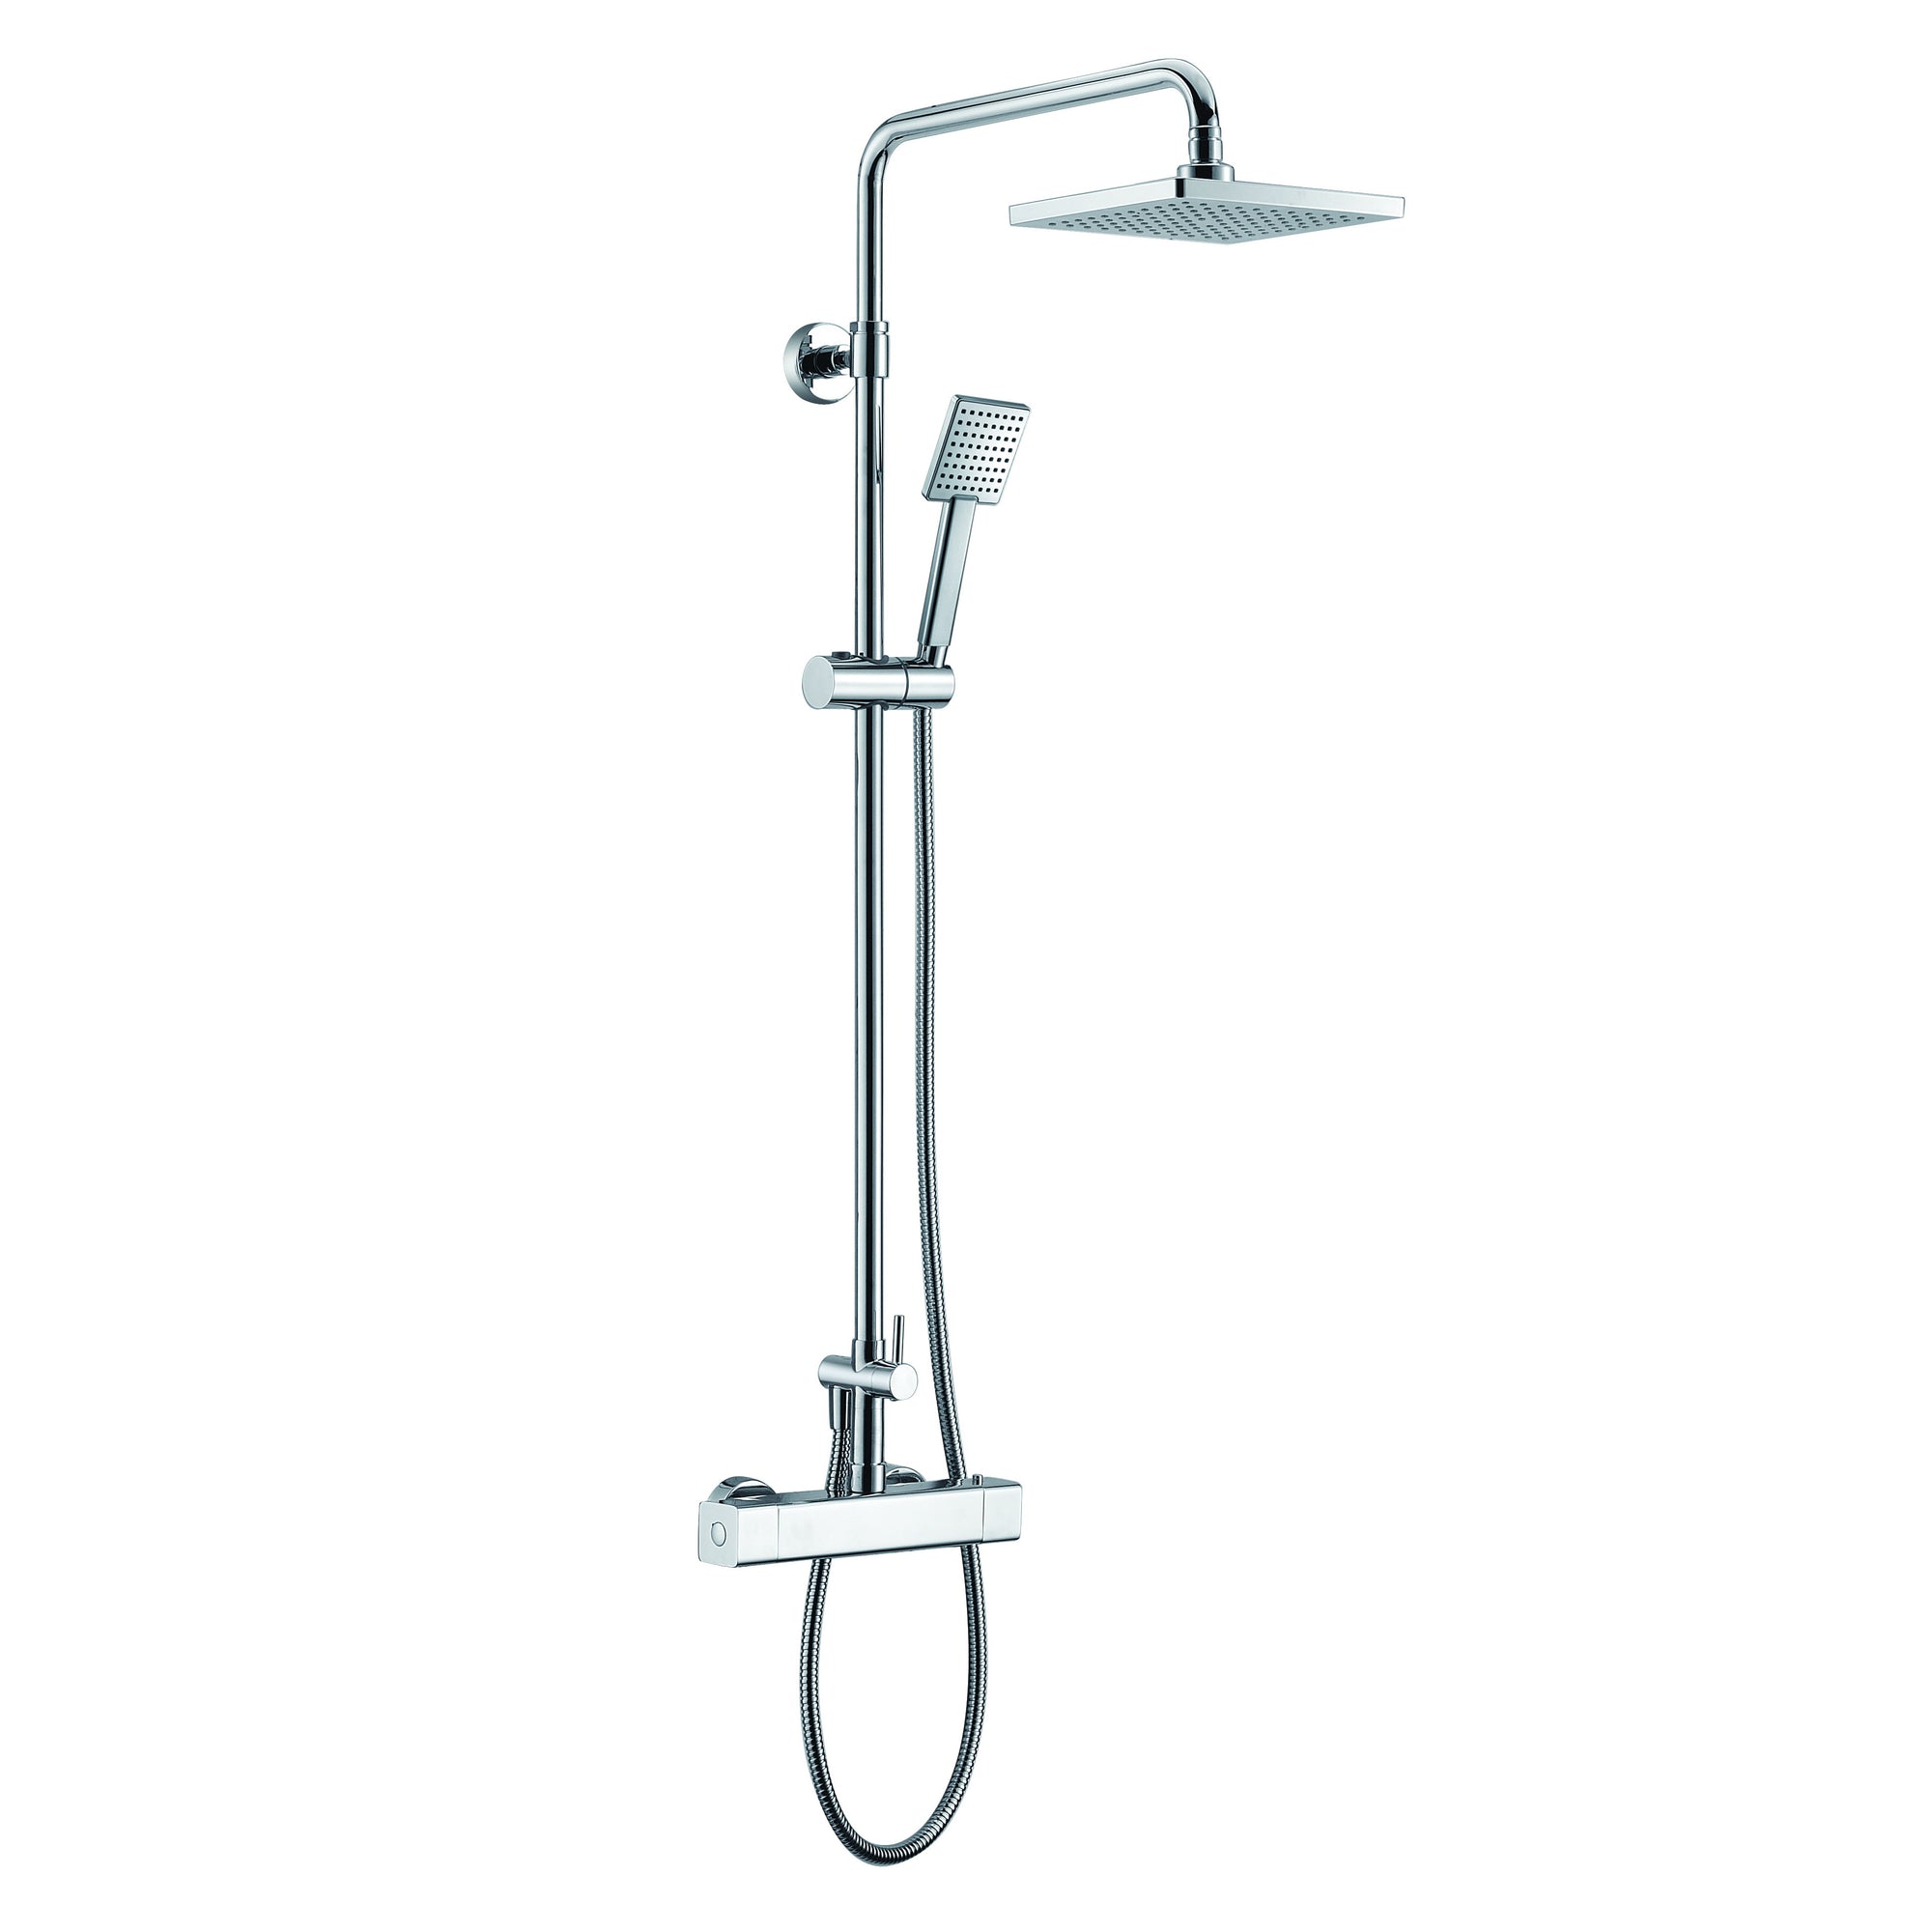 ALFI Polished Chrome Square Style Thermostatic Exposed Shower Set includes: Water Diverter, Temperature Control, On/Off Control, Rain Shower head, Handheld Shower head - AB2862-PC - Vital Hydrotherapy